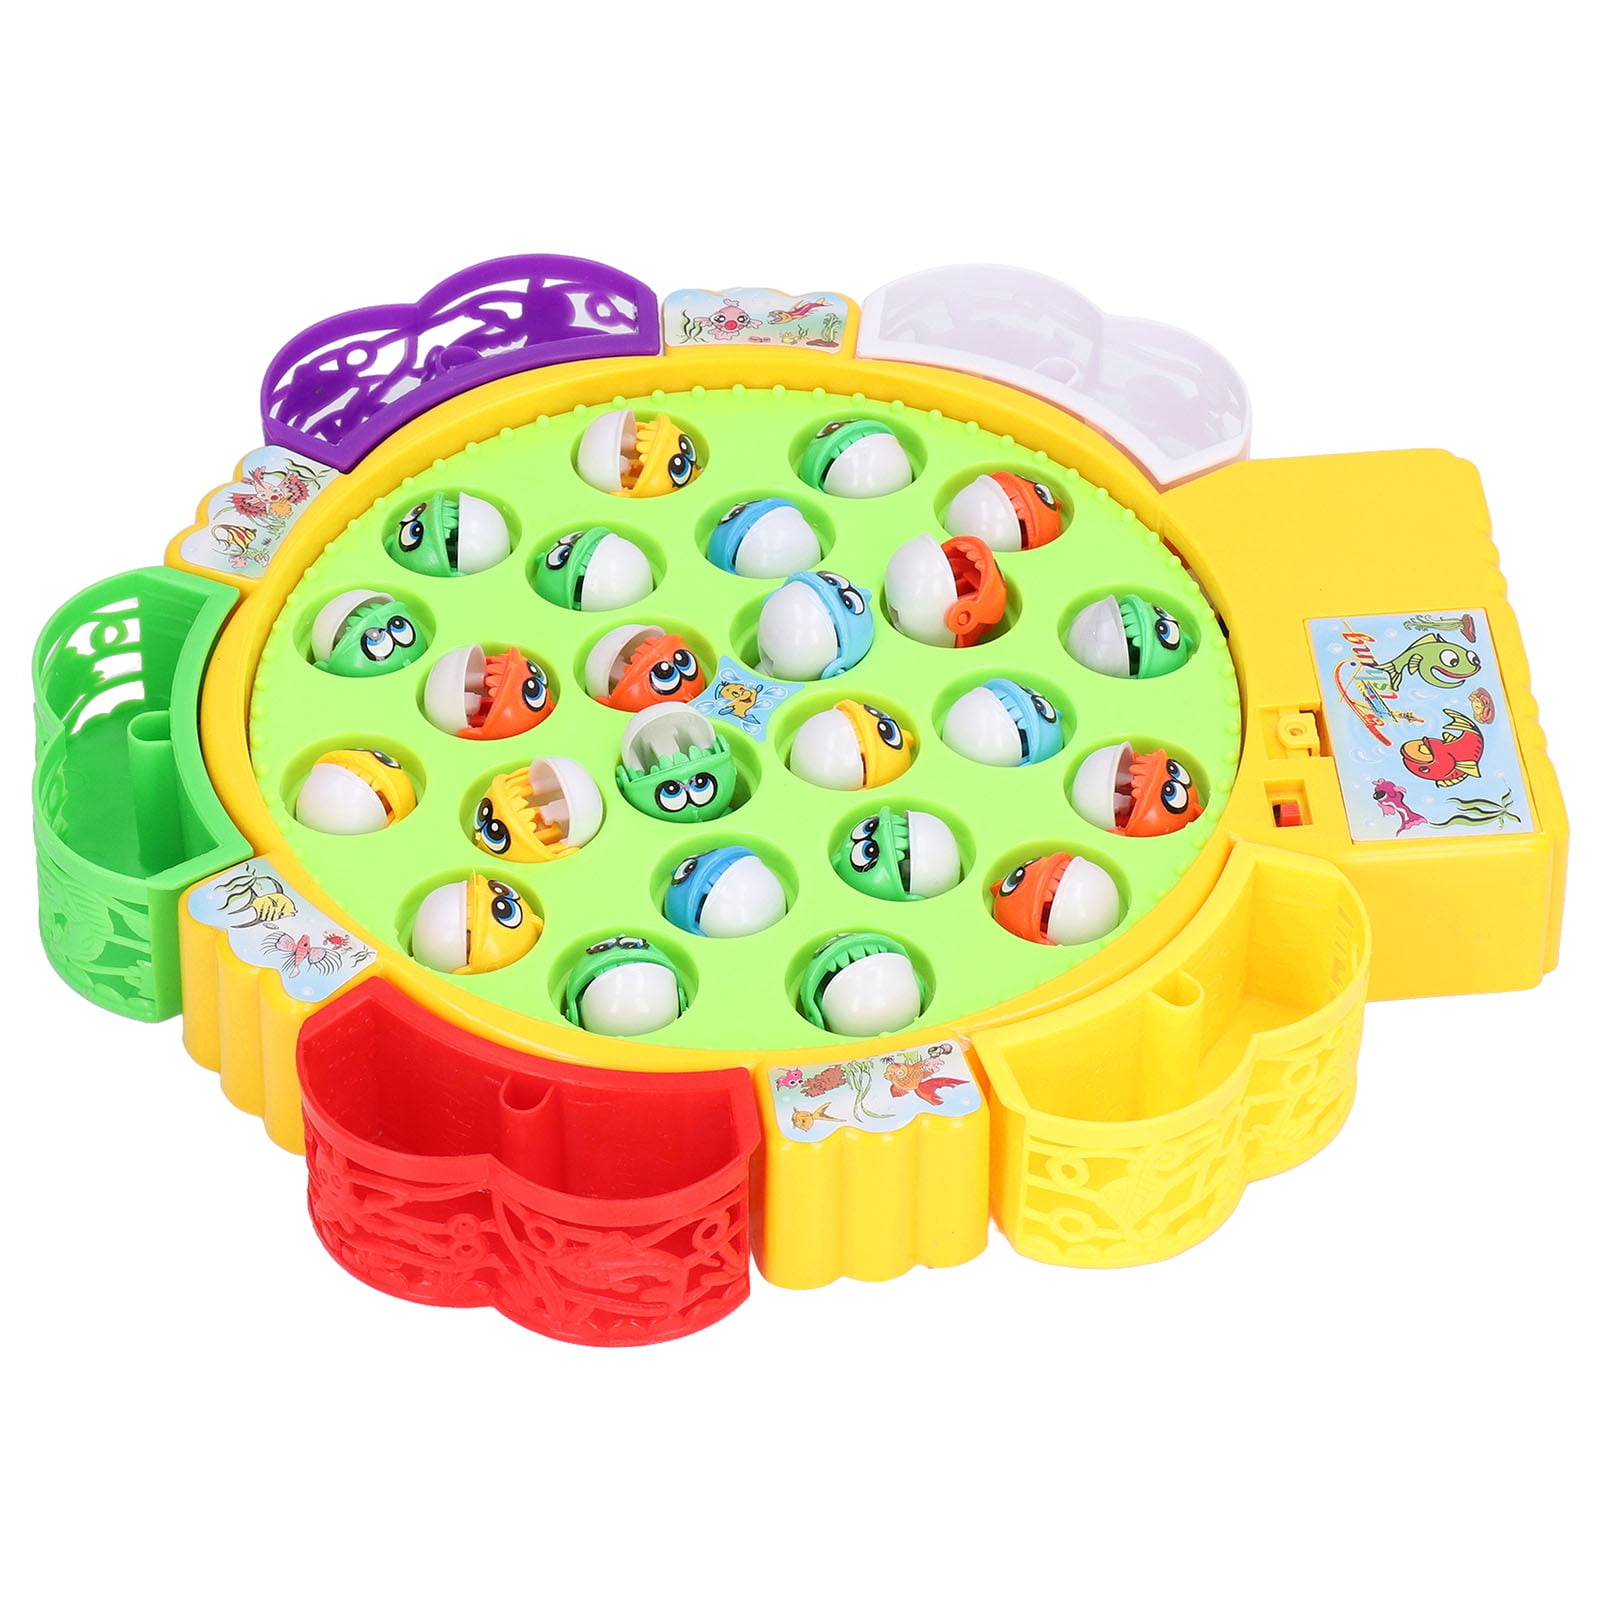 Toys Fishing Game for Kids - Party Toy with Fishing Poles, Swimming Fish,  Penguins and More. for Toddler Age 3 4 5 6 Year Old and up